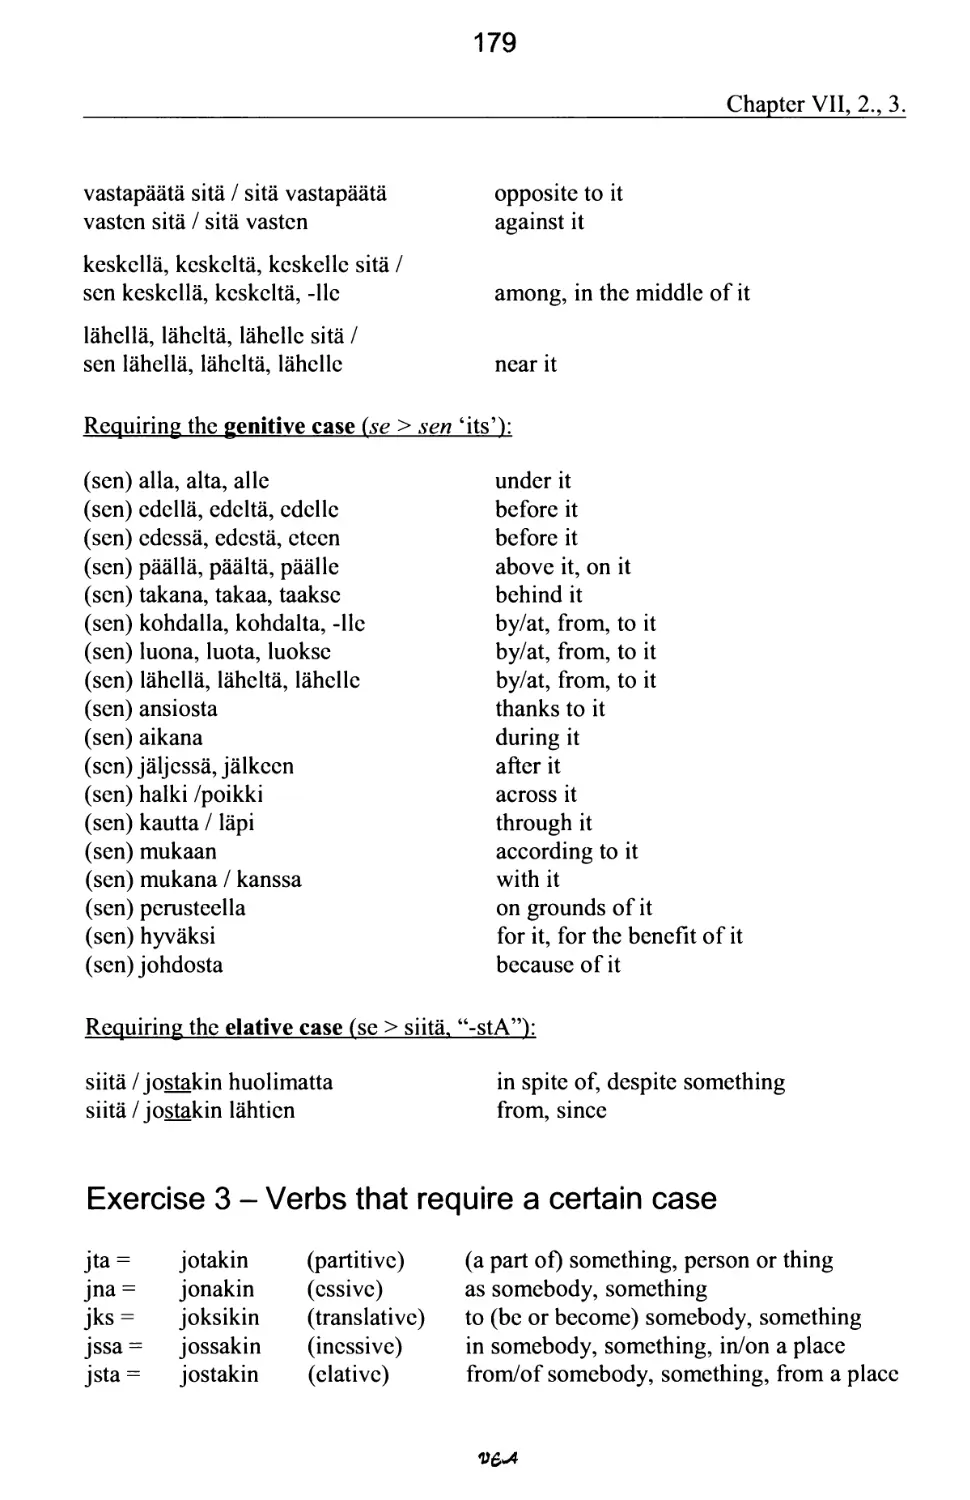 Exercise 3 - Verbs that require a certain case